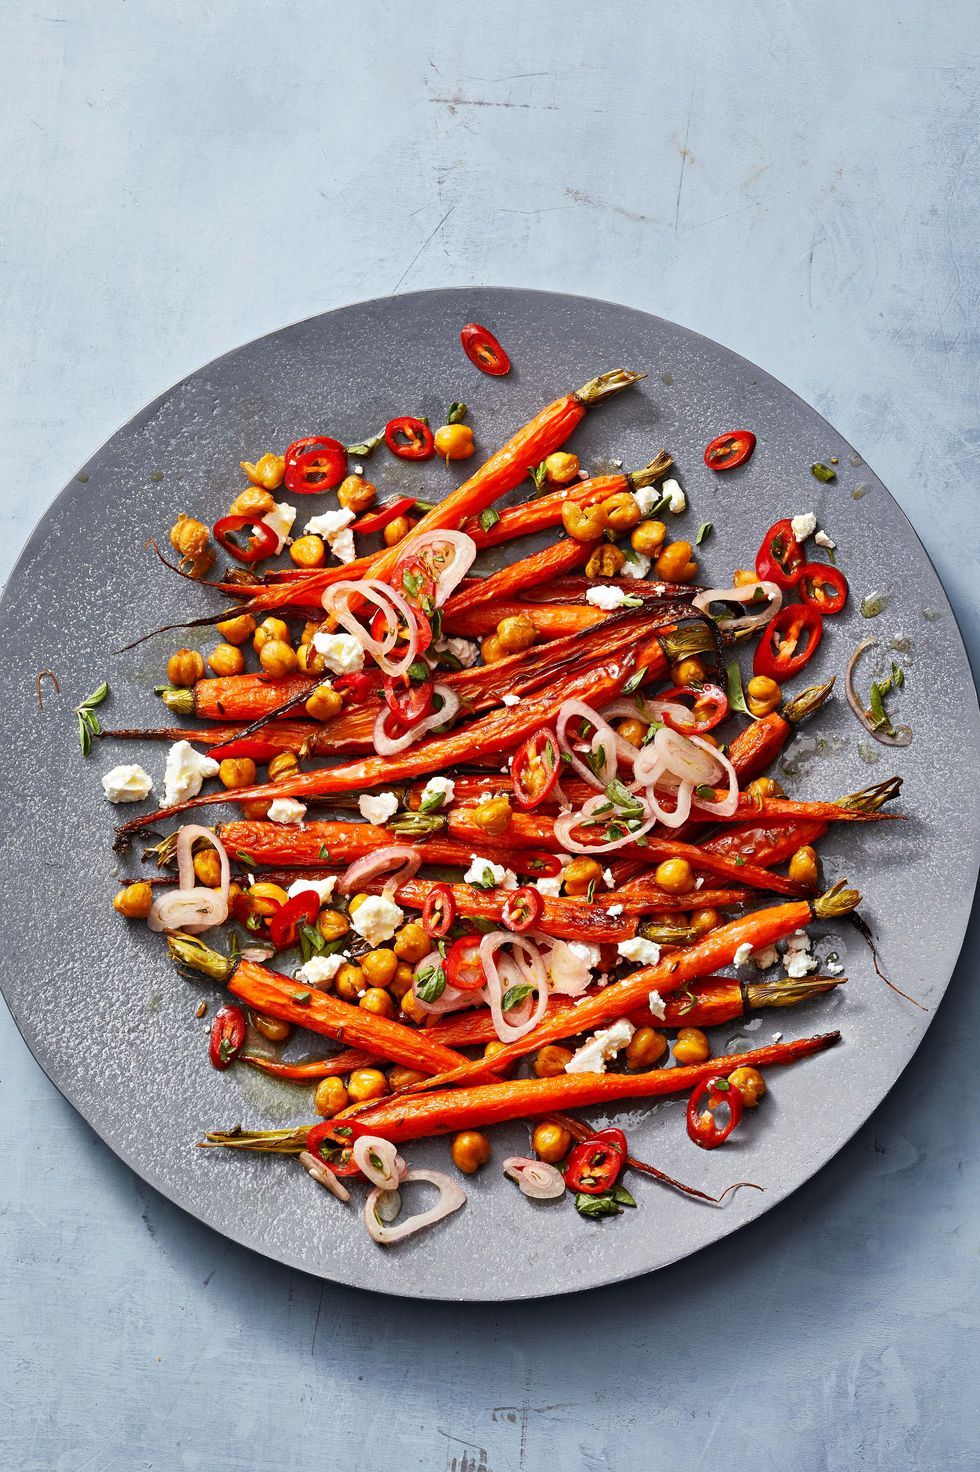 https://hips.hearstapps.com/hmg-prod/images/roasted-carrots-and-chickpeas-with-marinated-feta-healthy-air-fryer-recipes-643c10f30c5d9.jpg